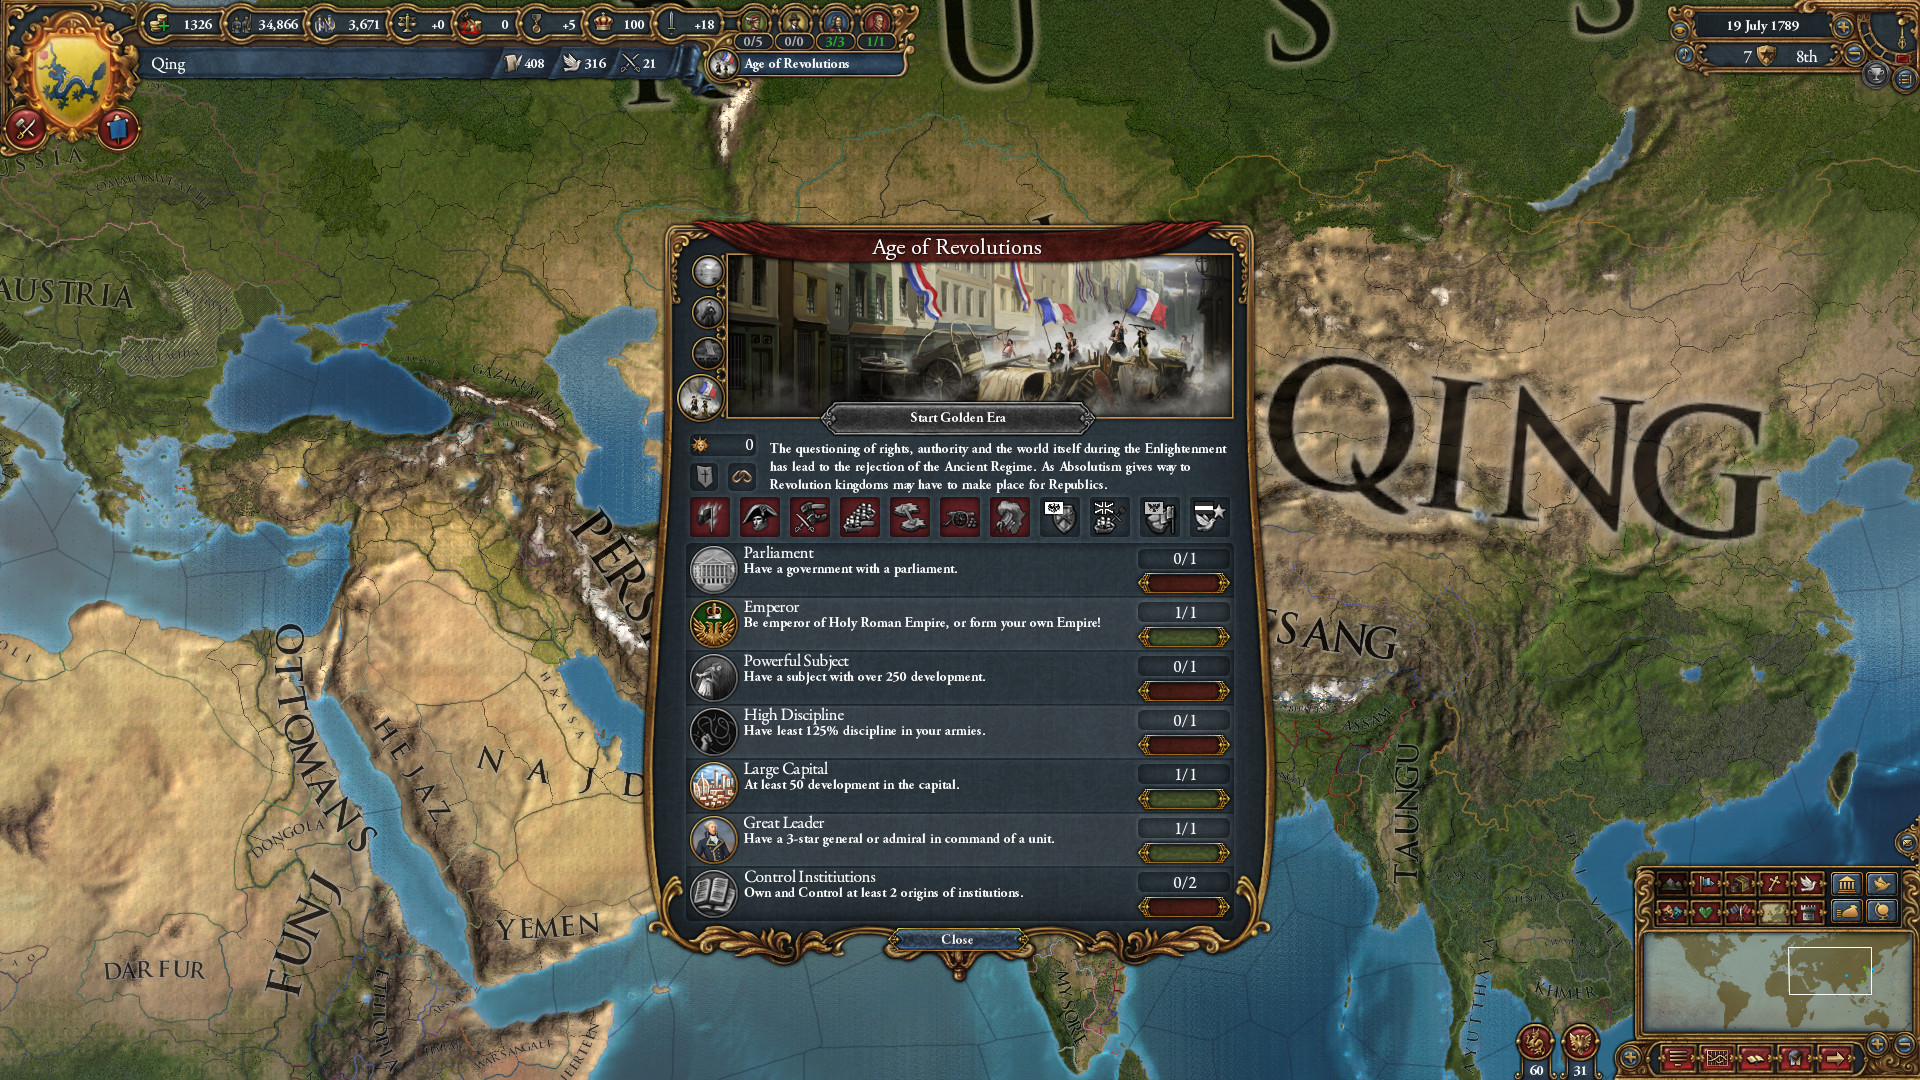 europa universalis 4 army composition